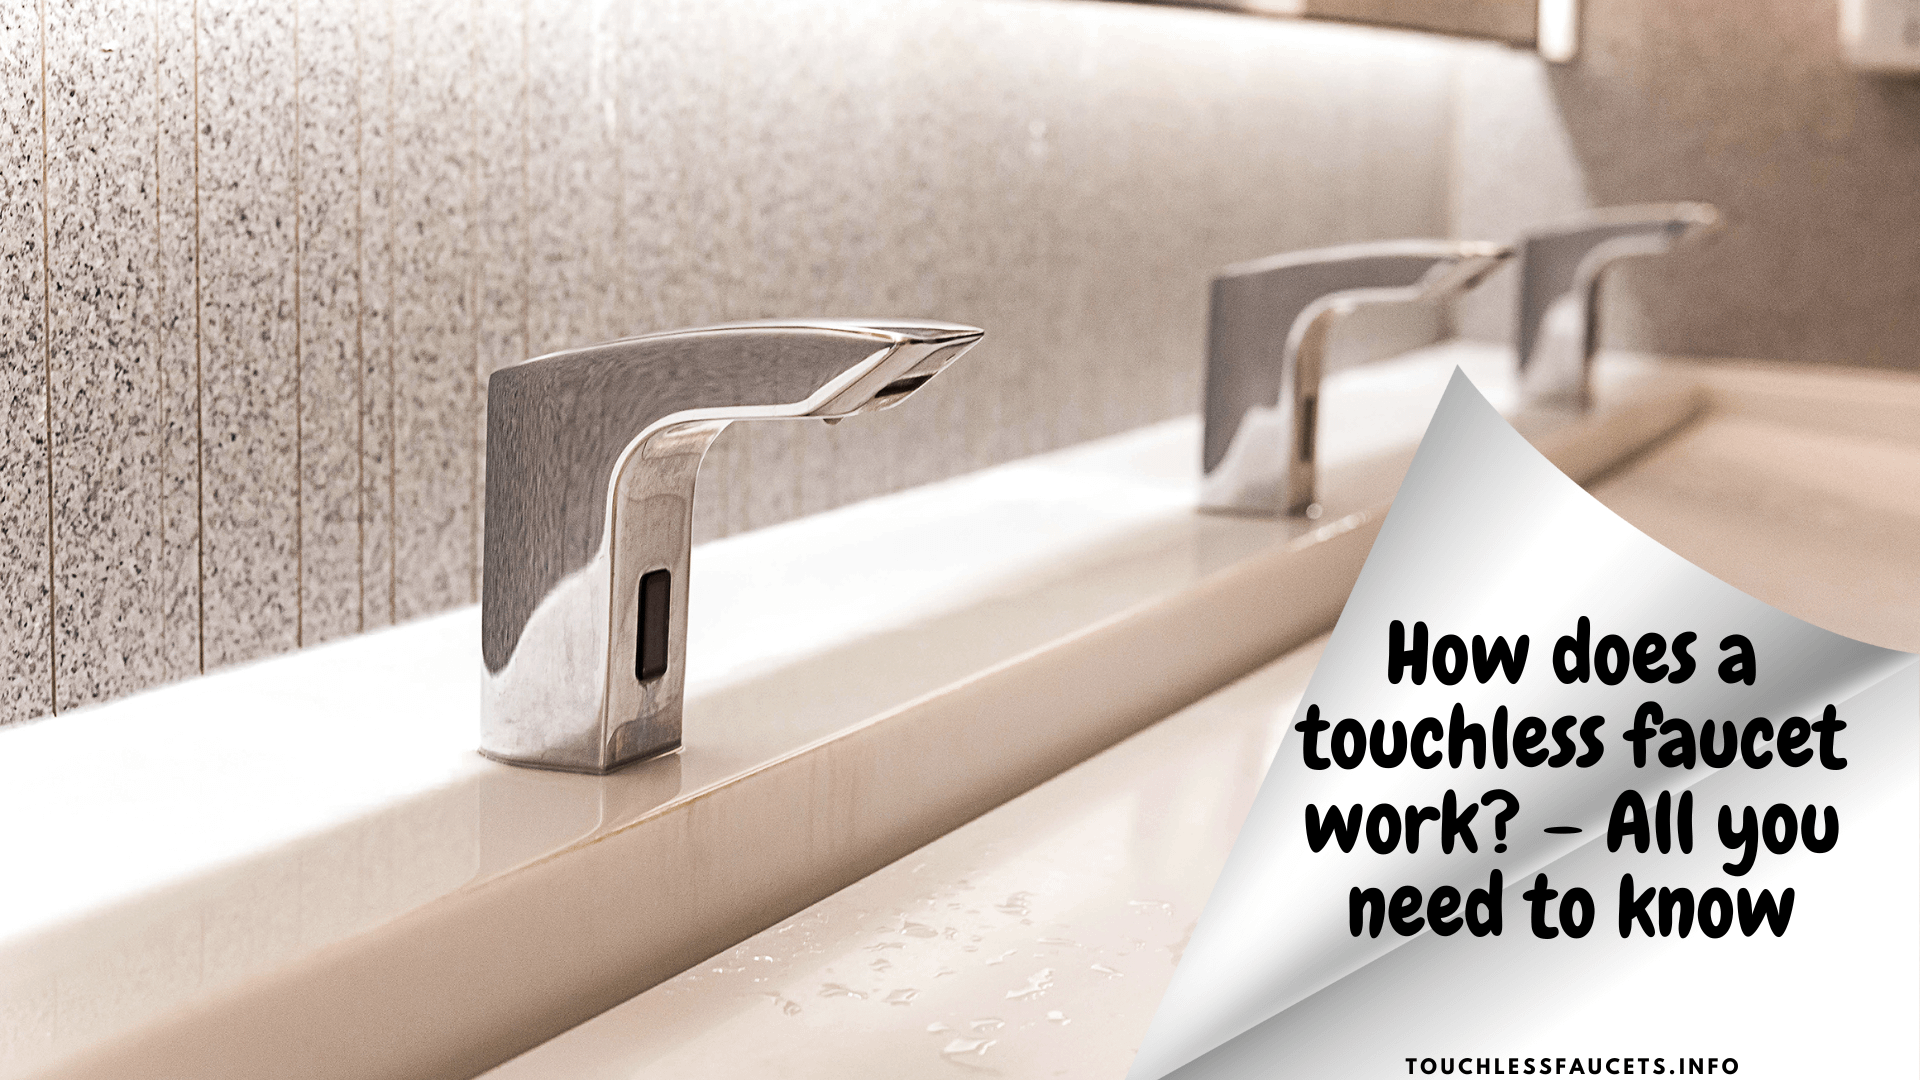 How does a touchless faucet work – All you need to know